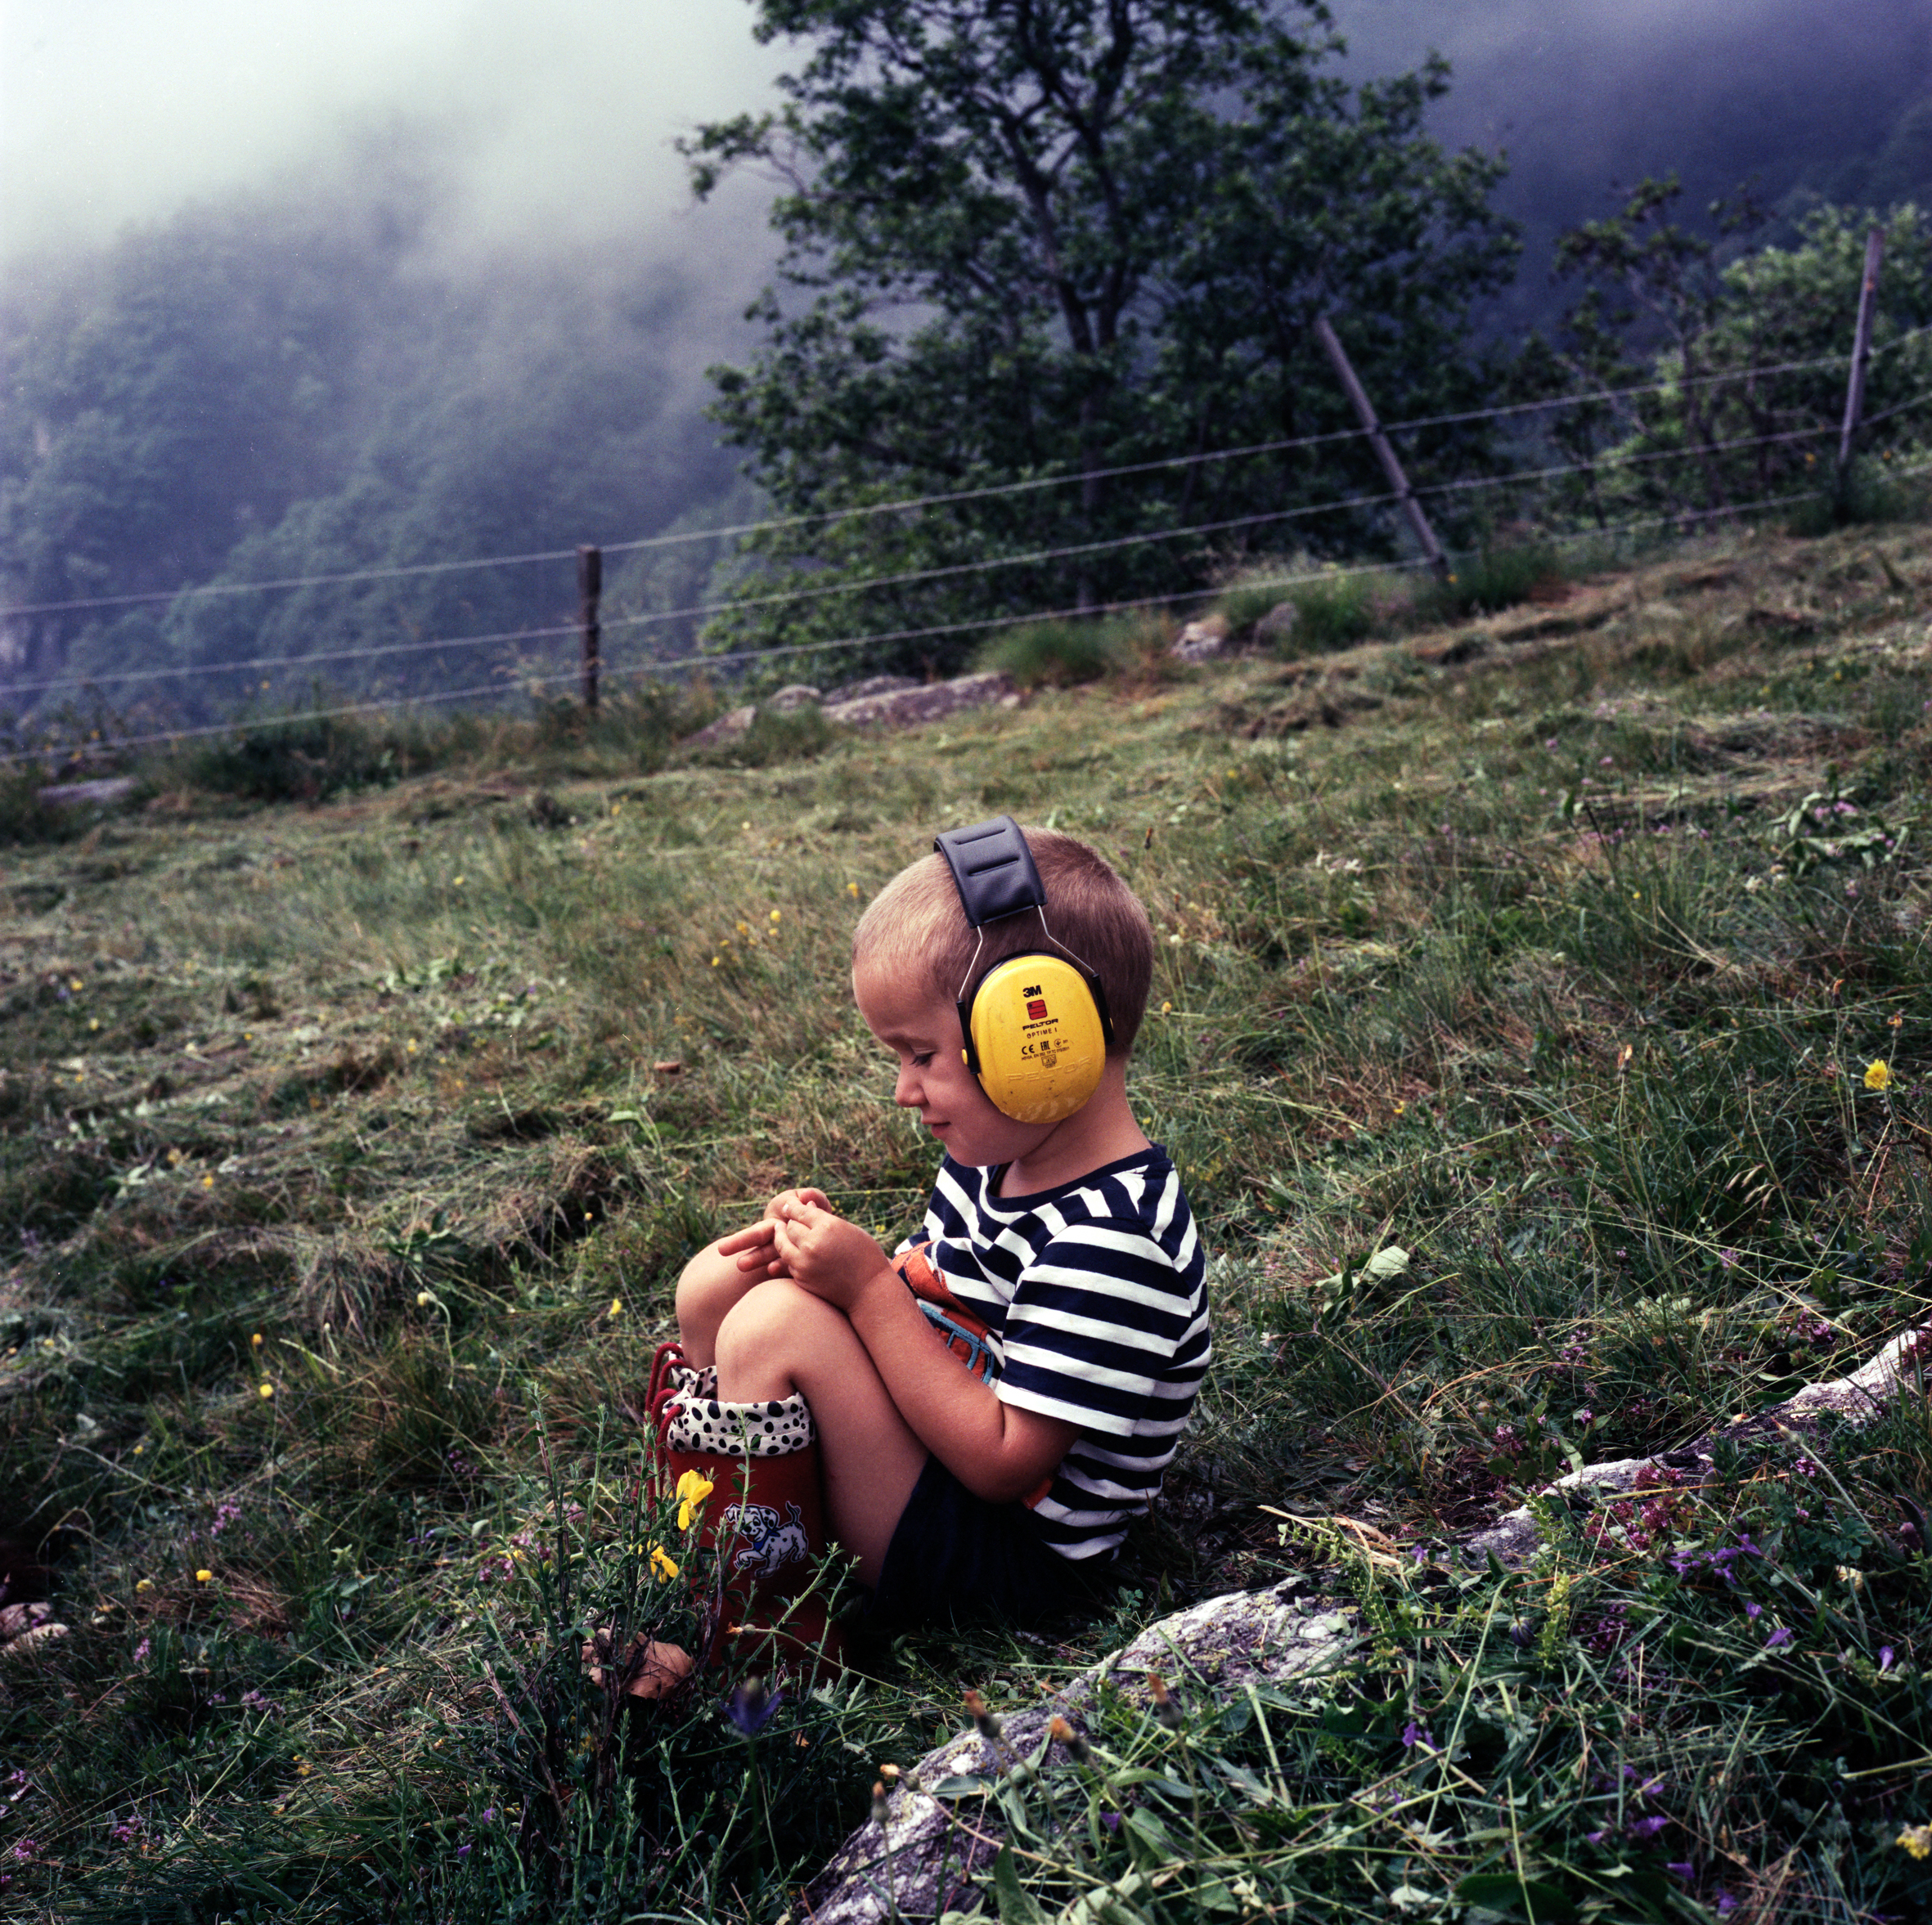 Ronald Patrick (Chile), from series Verzasca Nomads ©